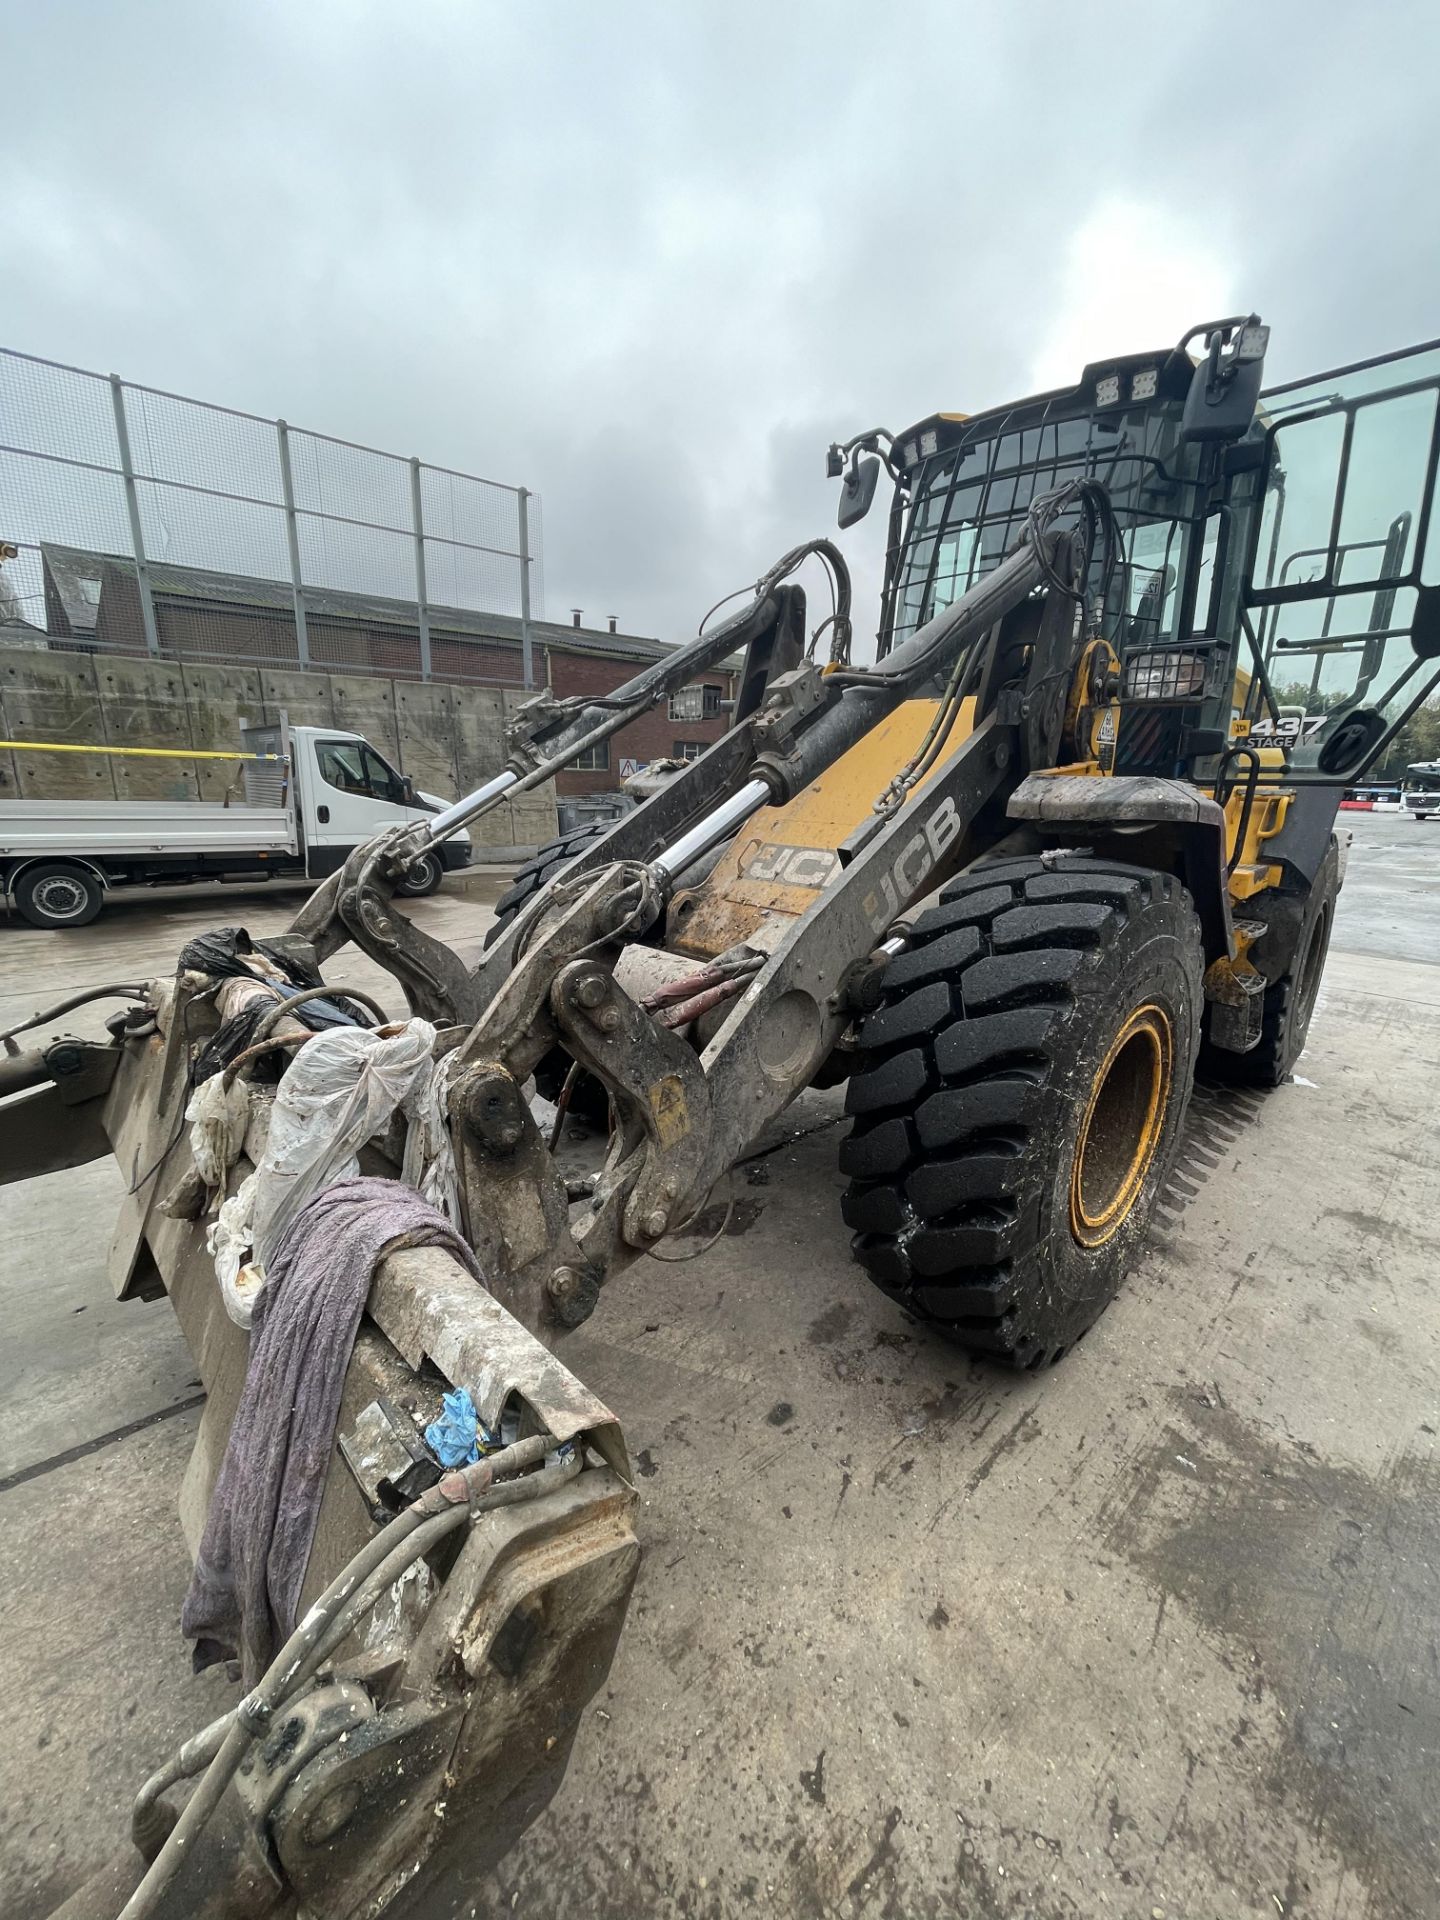 JCB, Wastemaster 437 S5, wheel loader, PIN: JCB4A8AAVK2680410 (DOM 2019), Last known Hours 3739.9, - Image 18 of 22